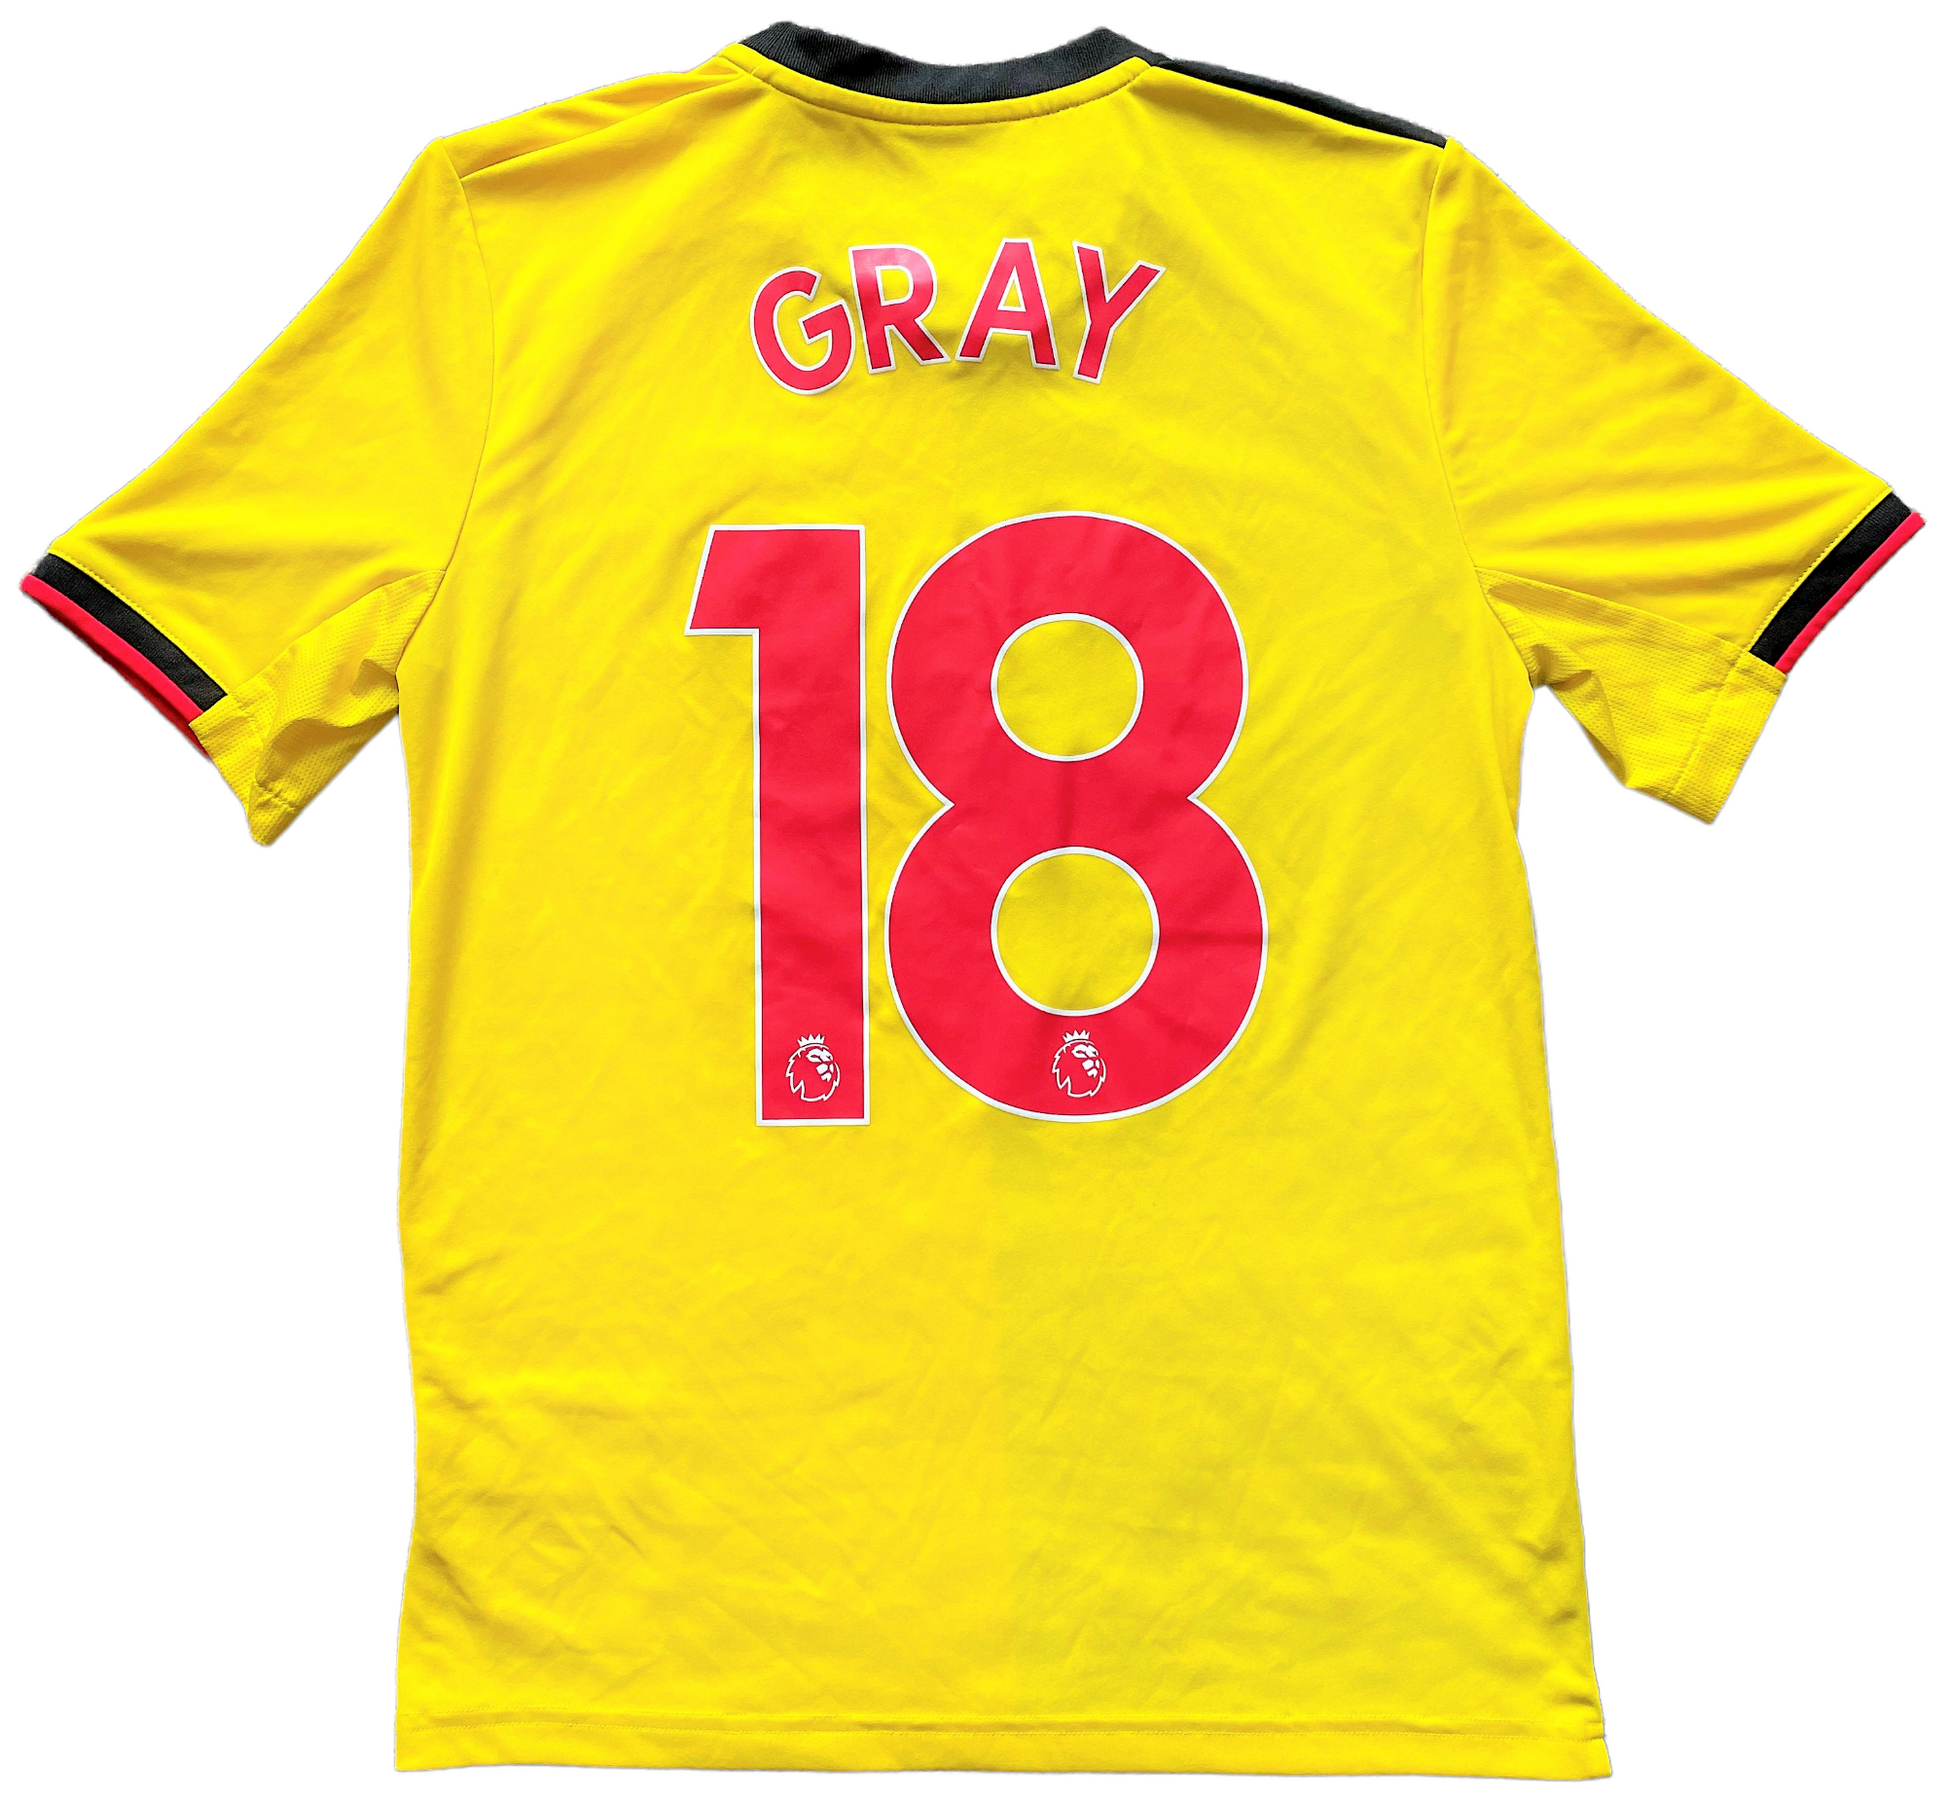 2019-20 Watford Home Shirt GRAY #18 (excellent) Youths 13 to 14 years